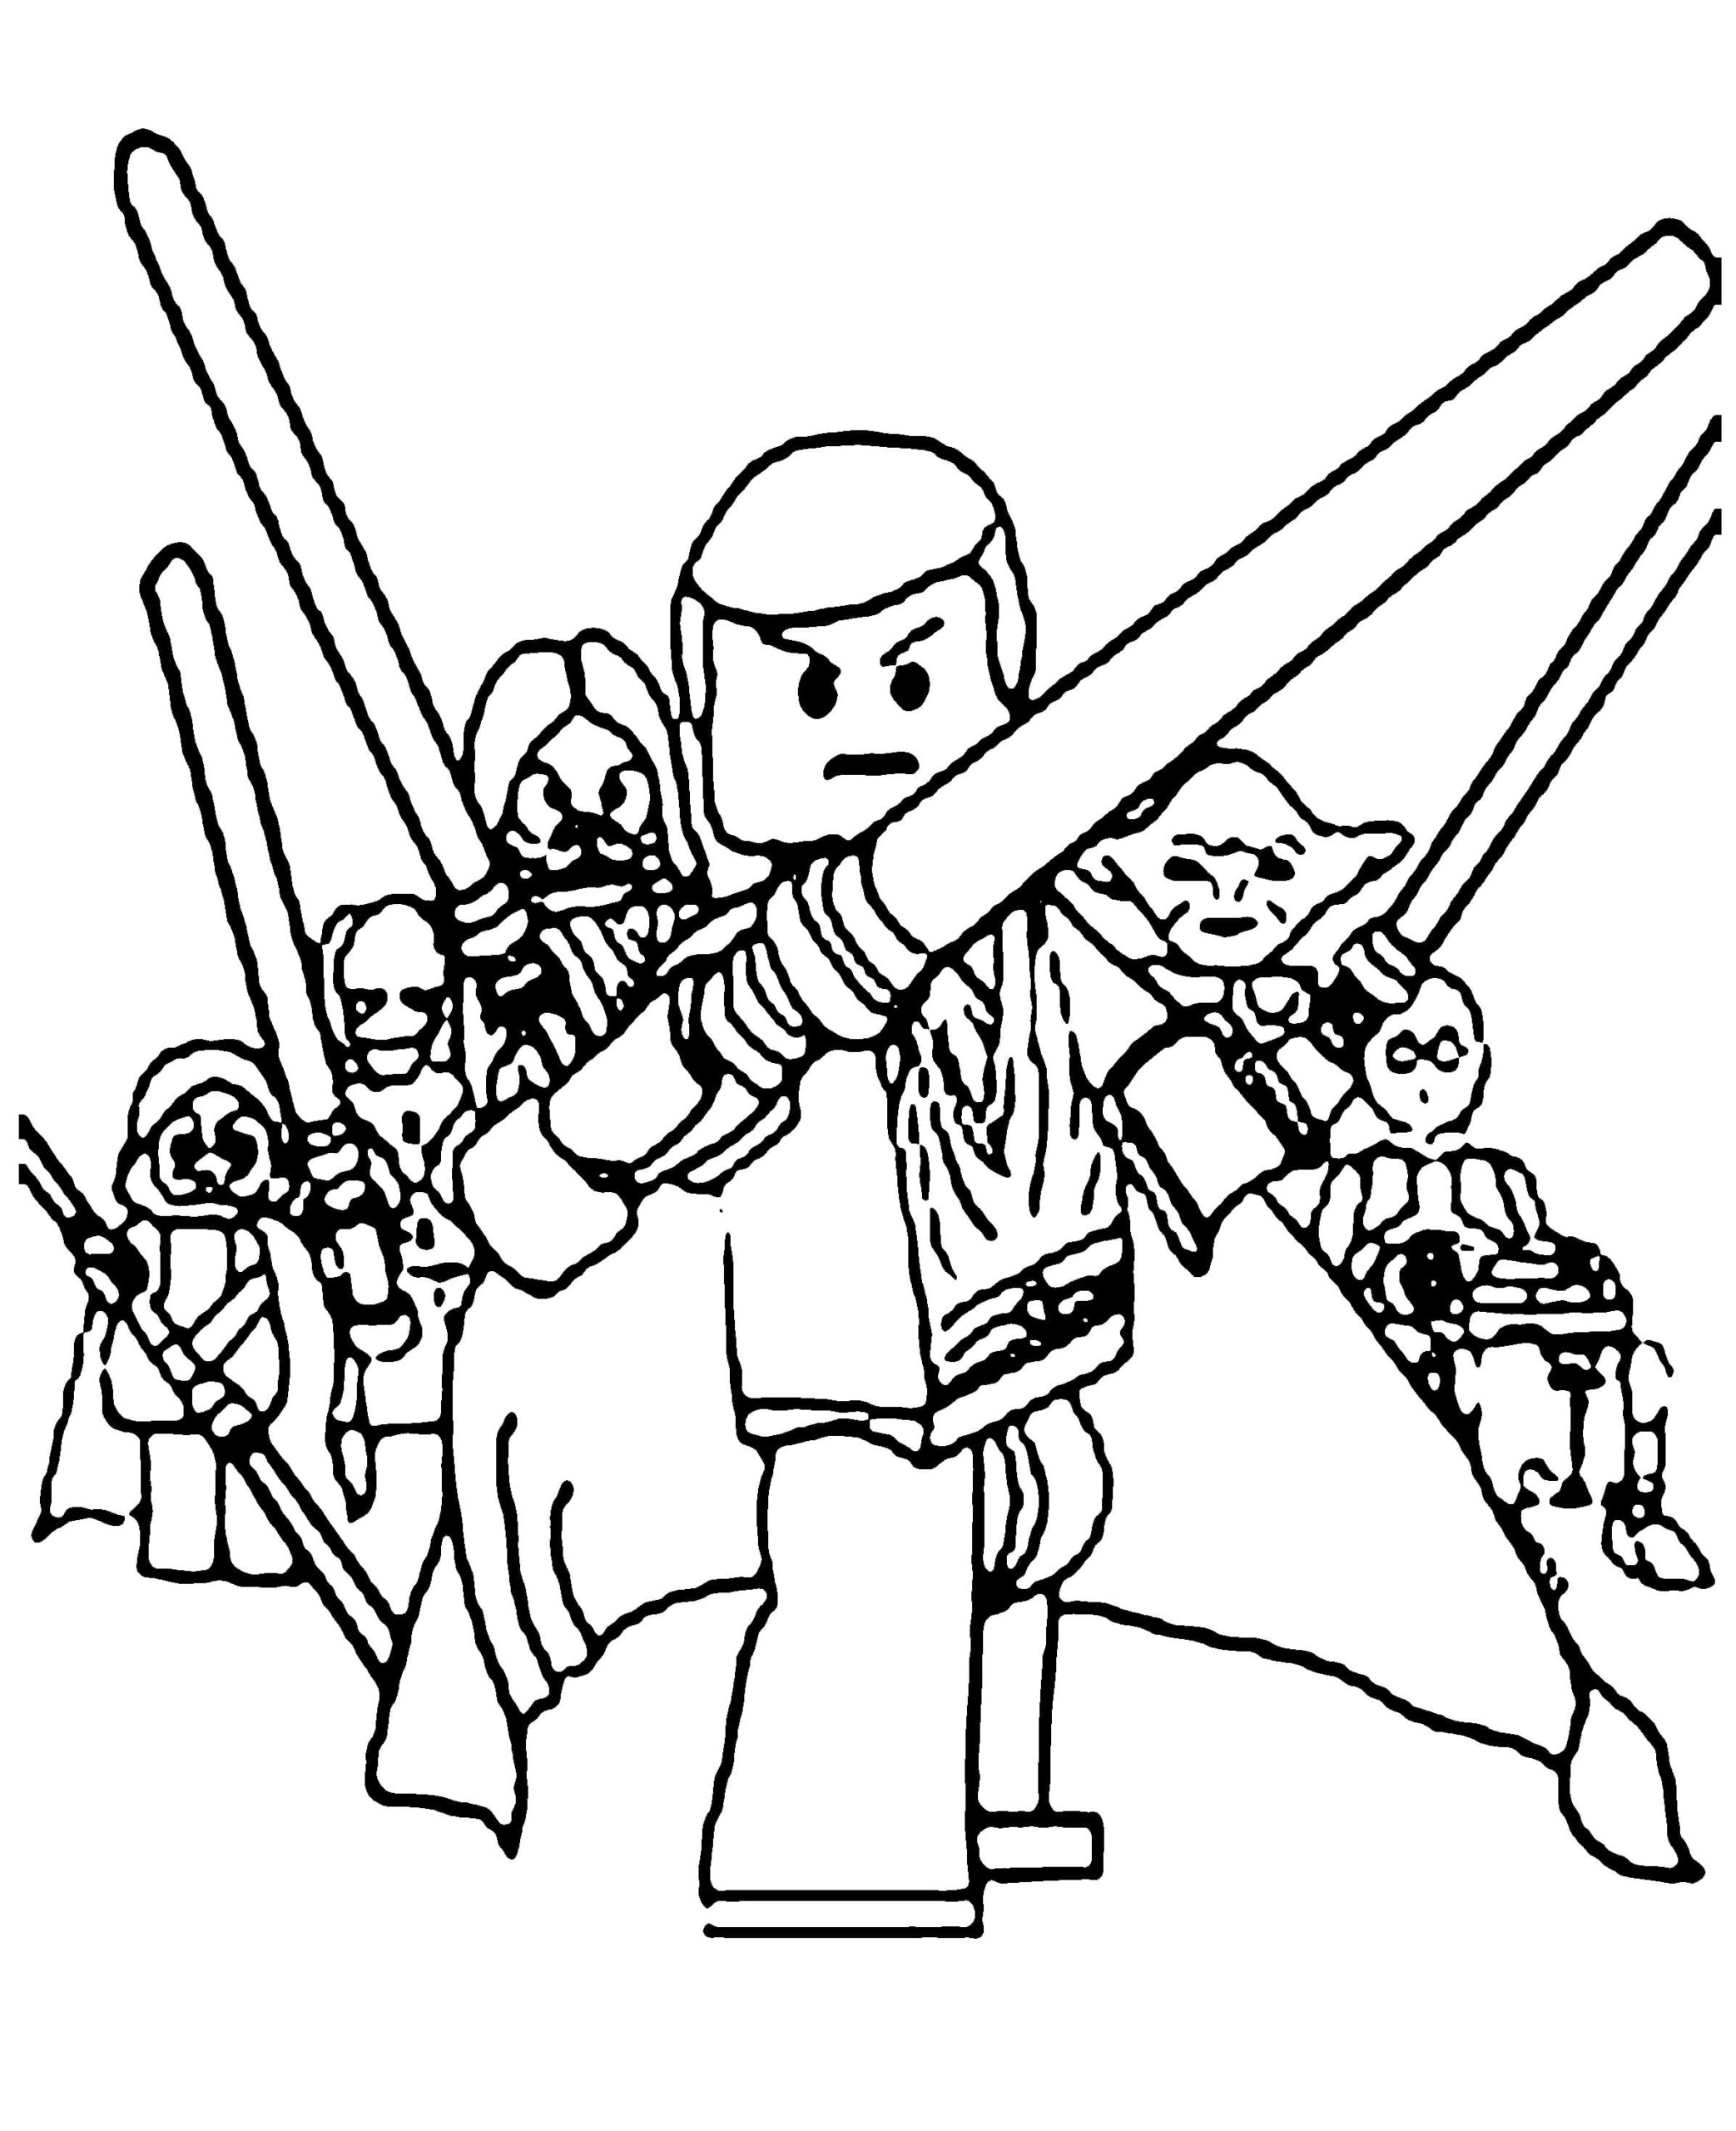 Drawing of Star Wars 39 from Lego Star Wars to print and coloring